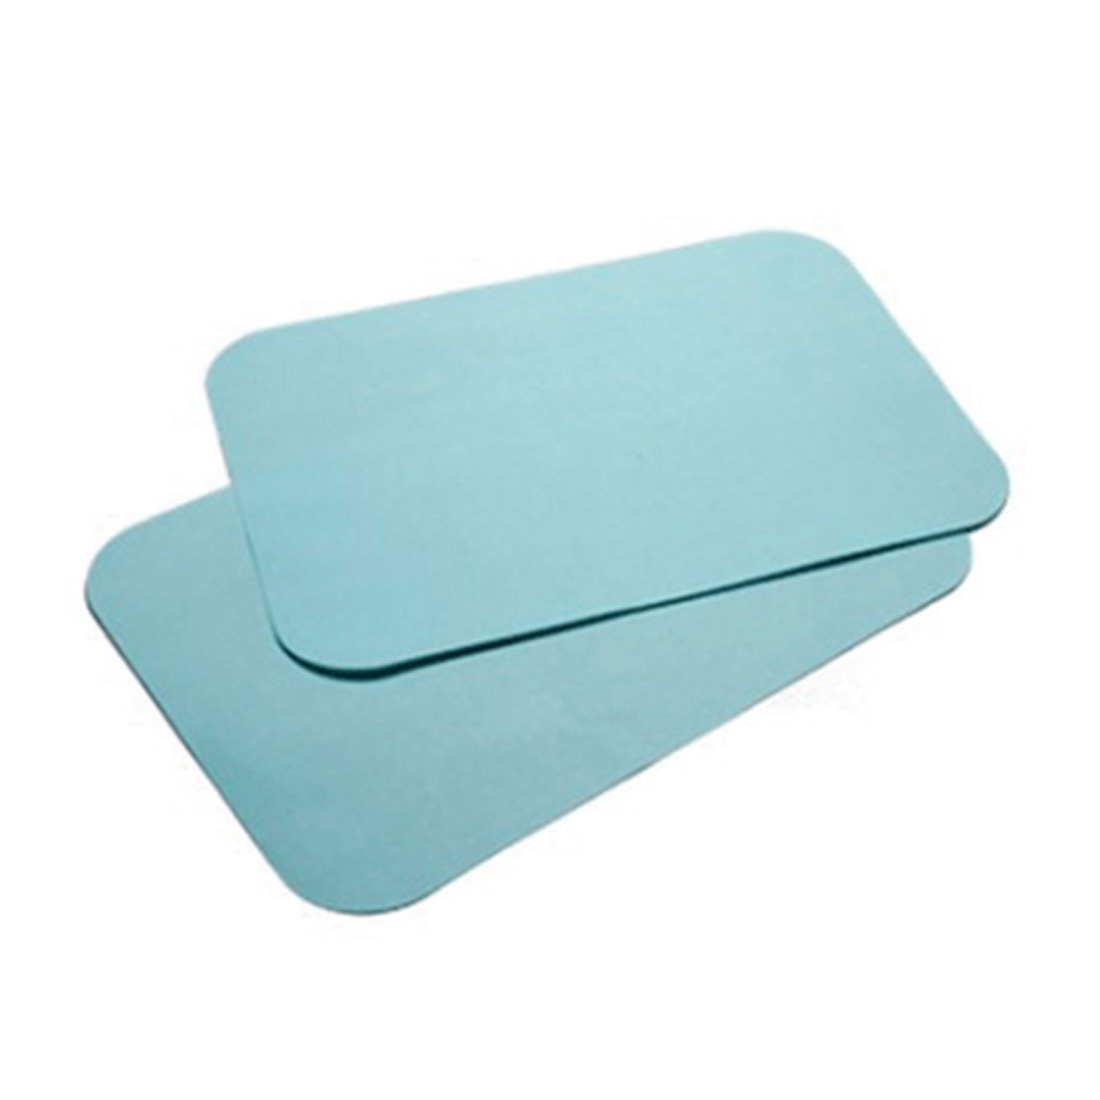 Bracket Tray Cover Ritter Size B 8 1/2" X 12 1/4" Blue - 1000/Case